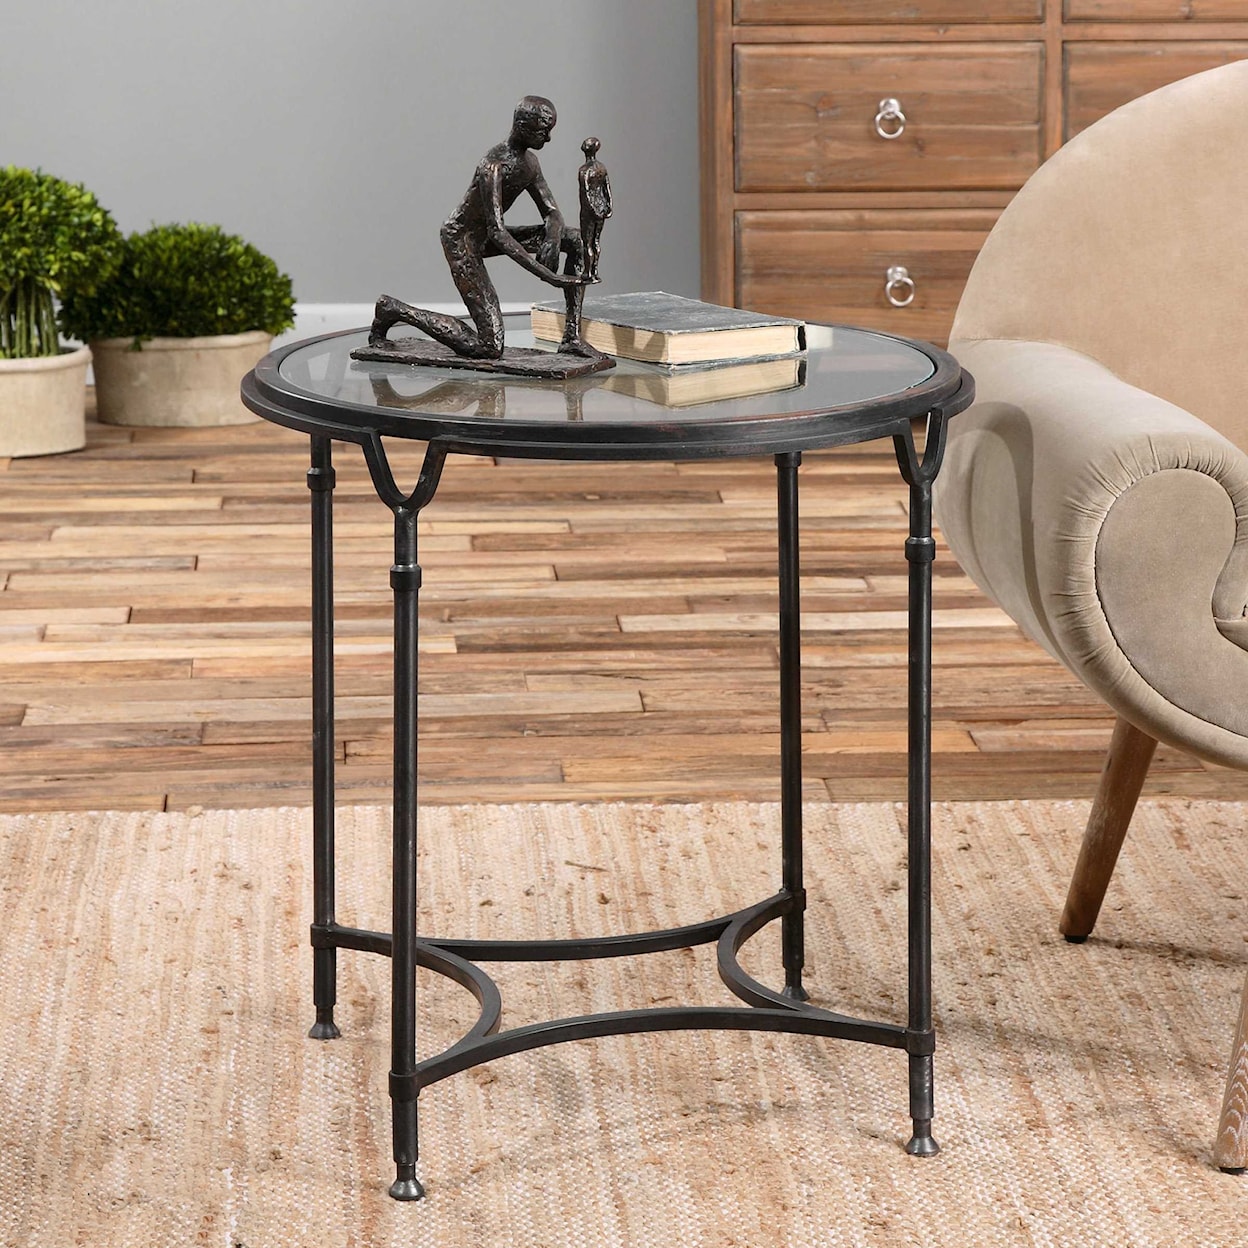 Uttermost Accent Furniture - Occasional Tables Samson Glass Side Table